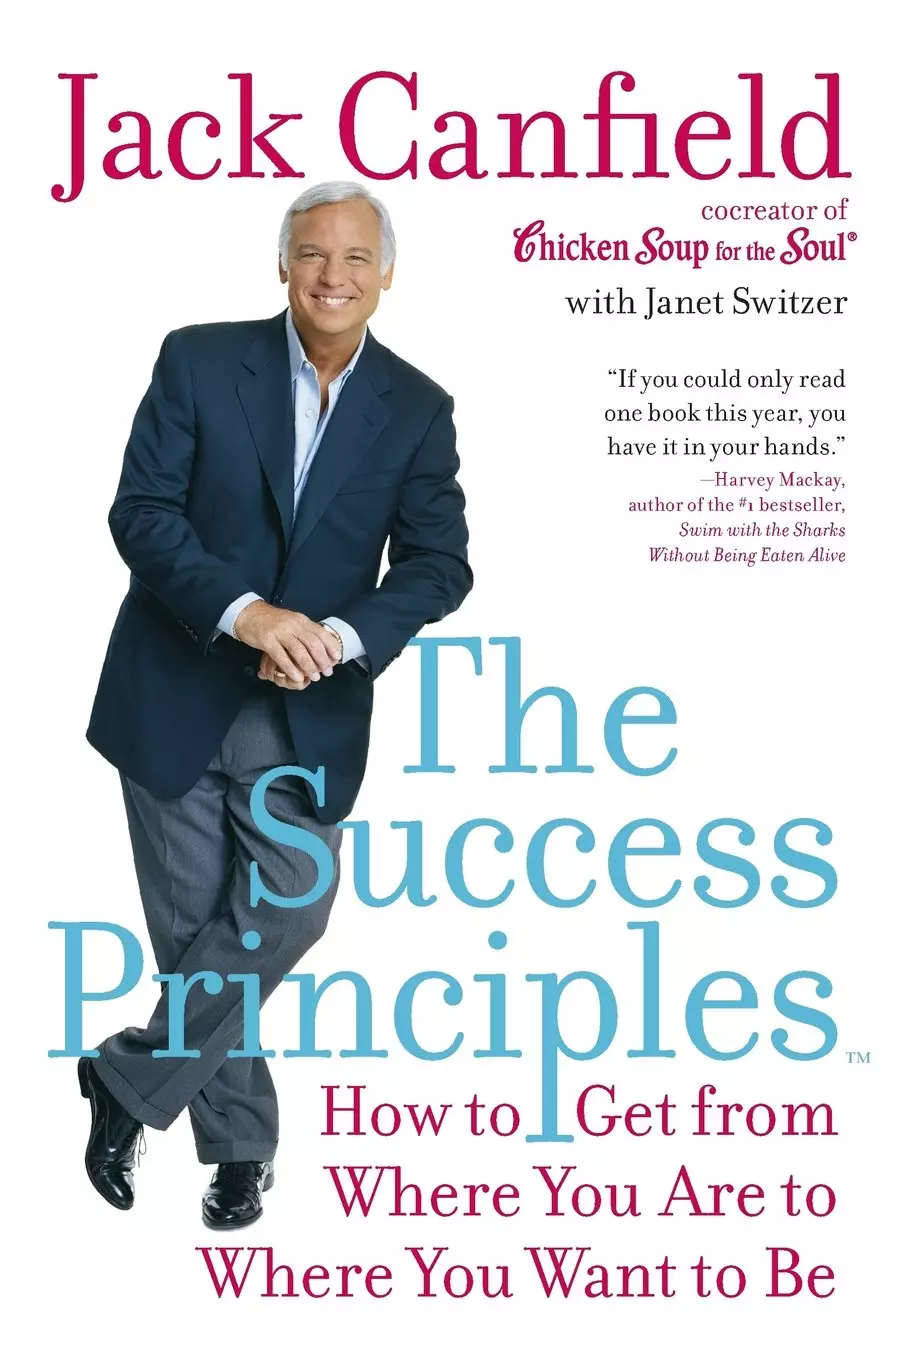 The_Success_Principles-_How_to_Get_from_Where_You_Are_to_Where_You_Want_to_Be_Book.jpg